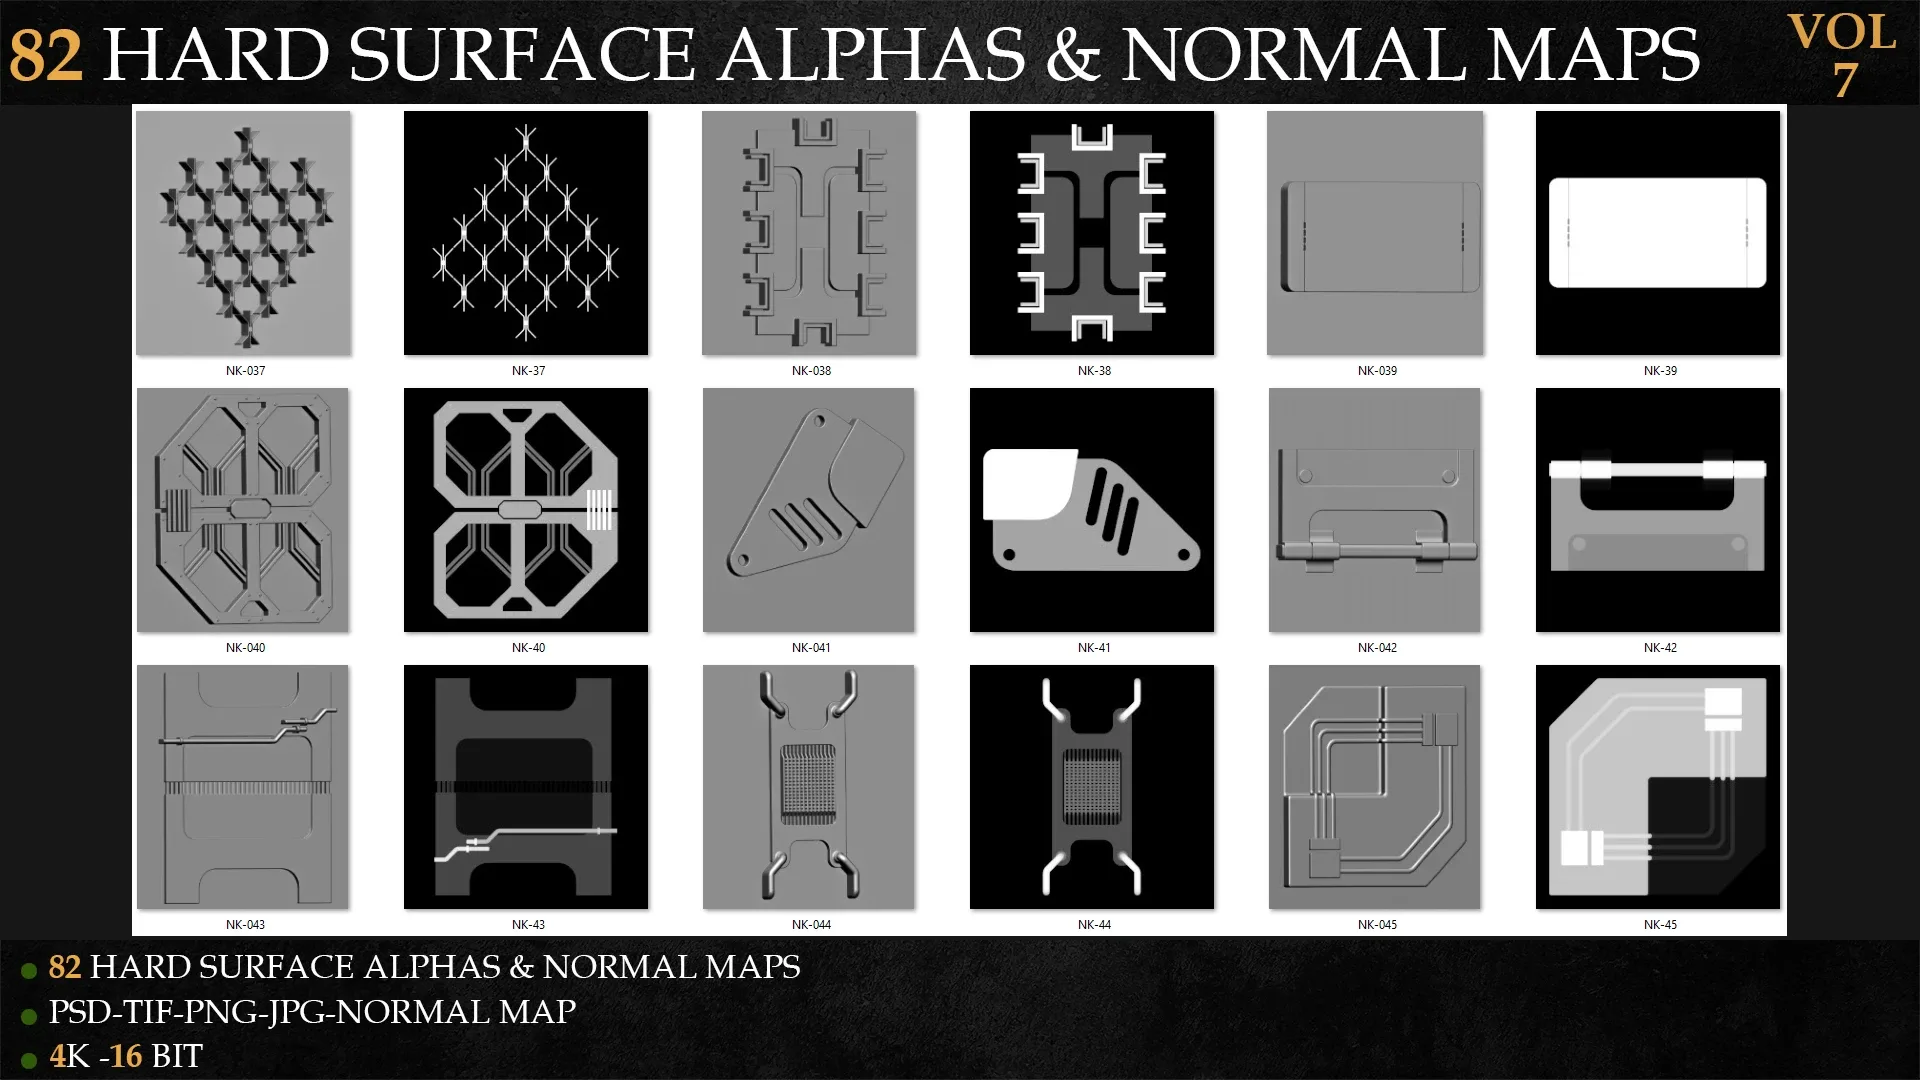 82 HARD SURFACE ALPHAS & NORMAL MAPS-VOL 7